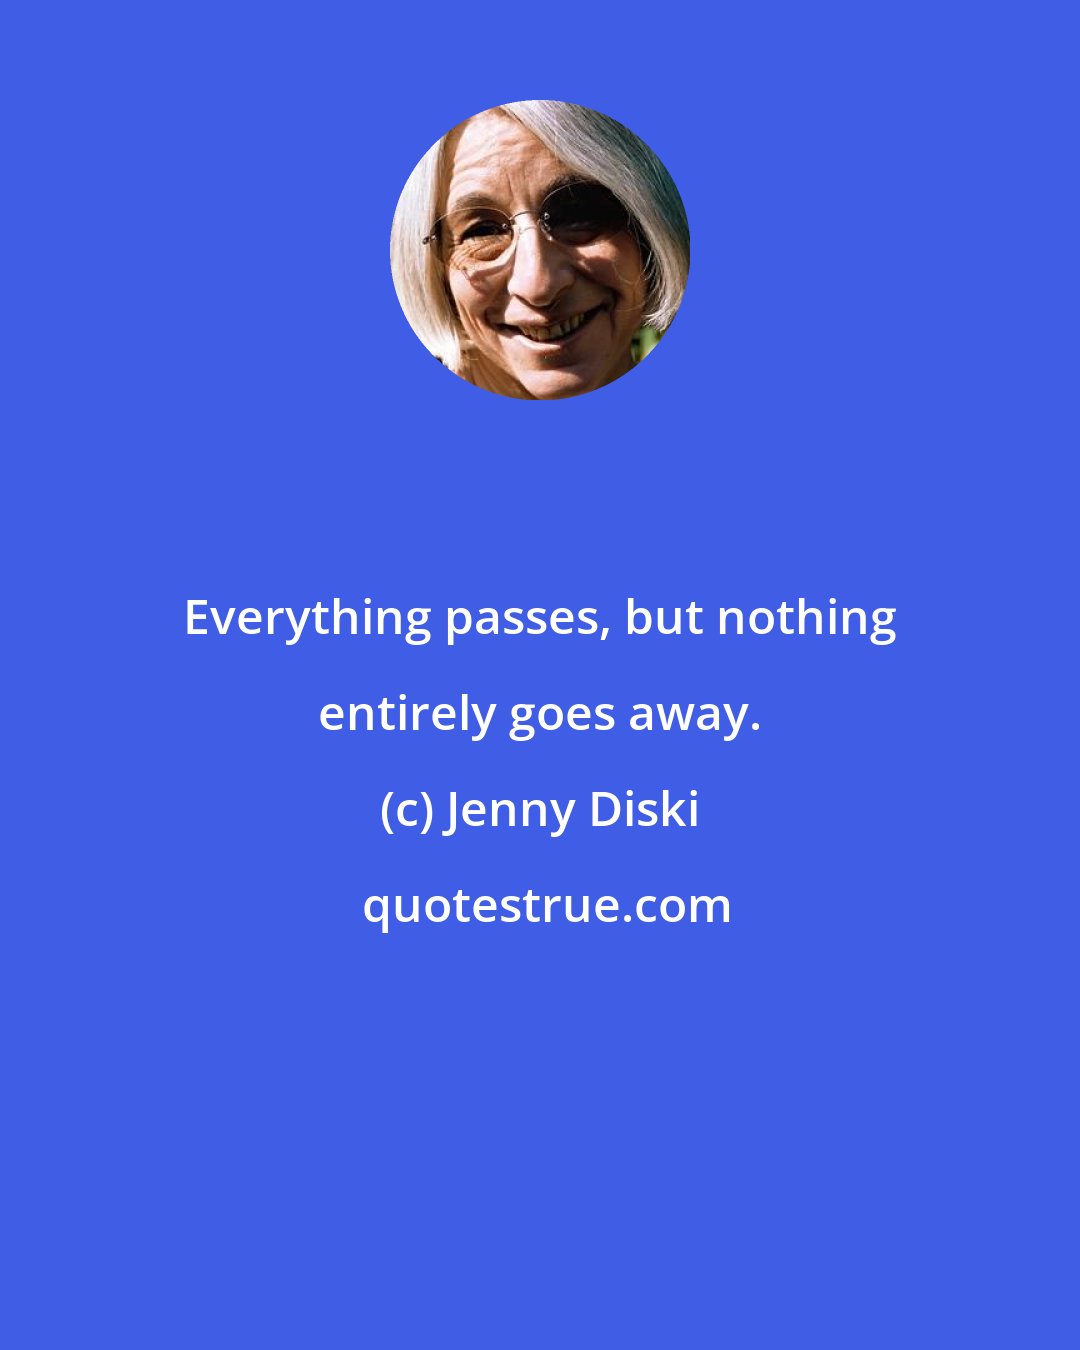 Jenny Diski: Everything passes, but nothing entirely goes away.